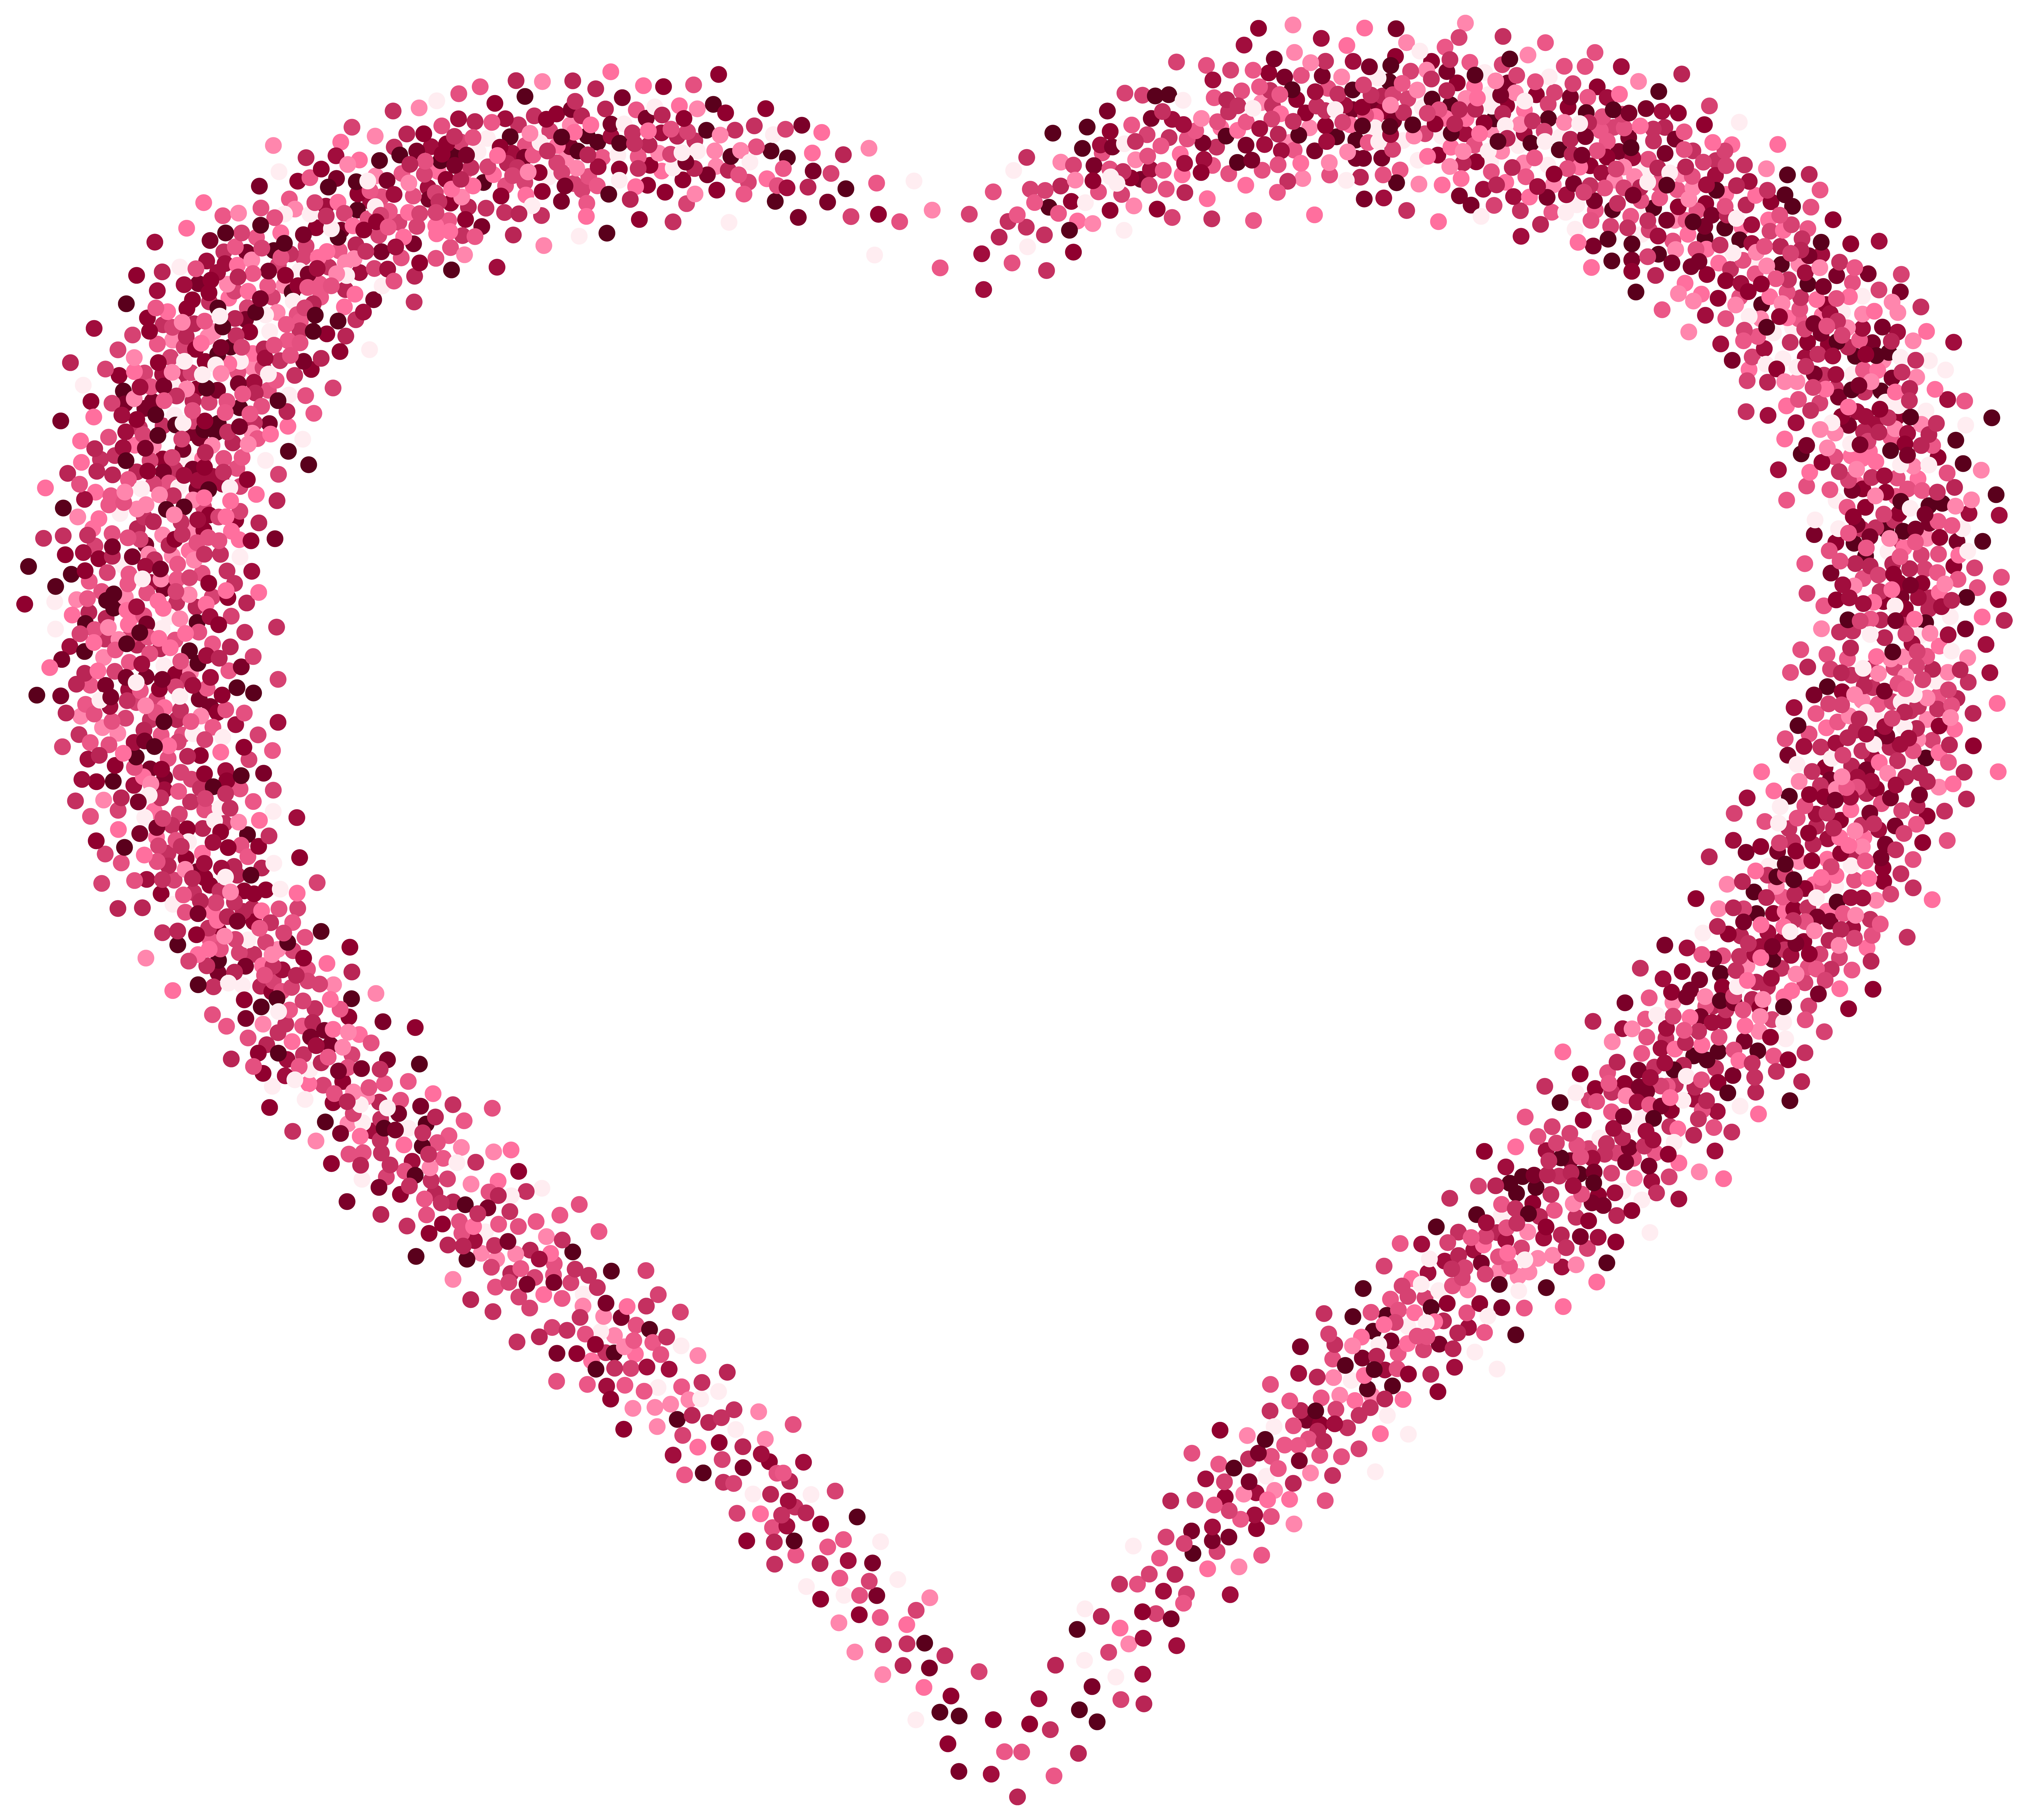 Decorative Pink Heart PNG Image.